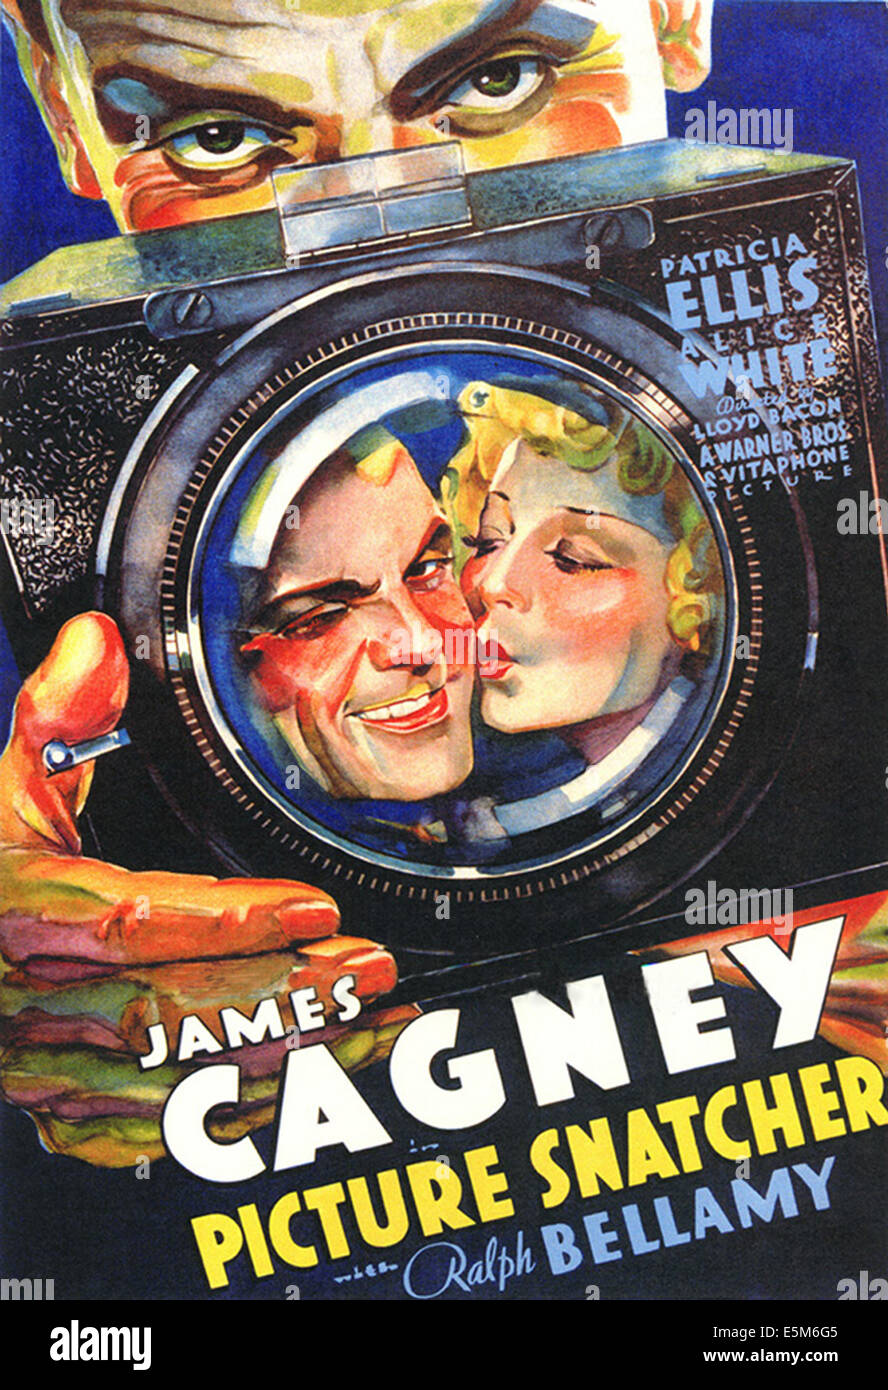 PICTURE SNATCHER, James Cagney, Alice White, 1933 Stock Photo